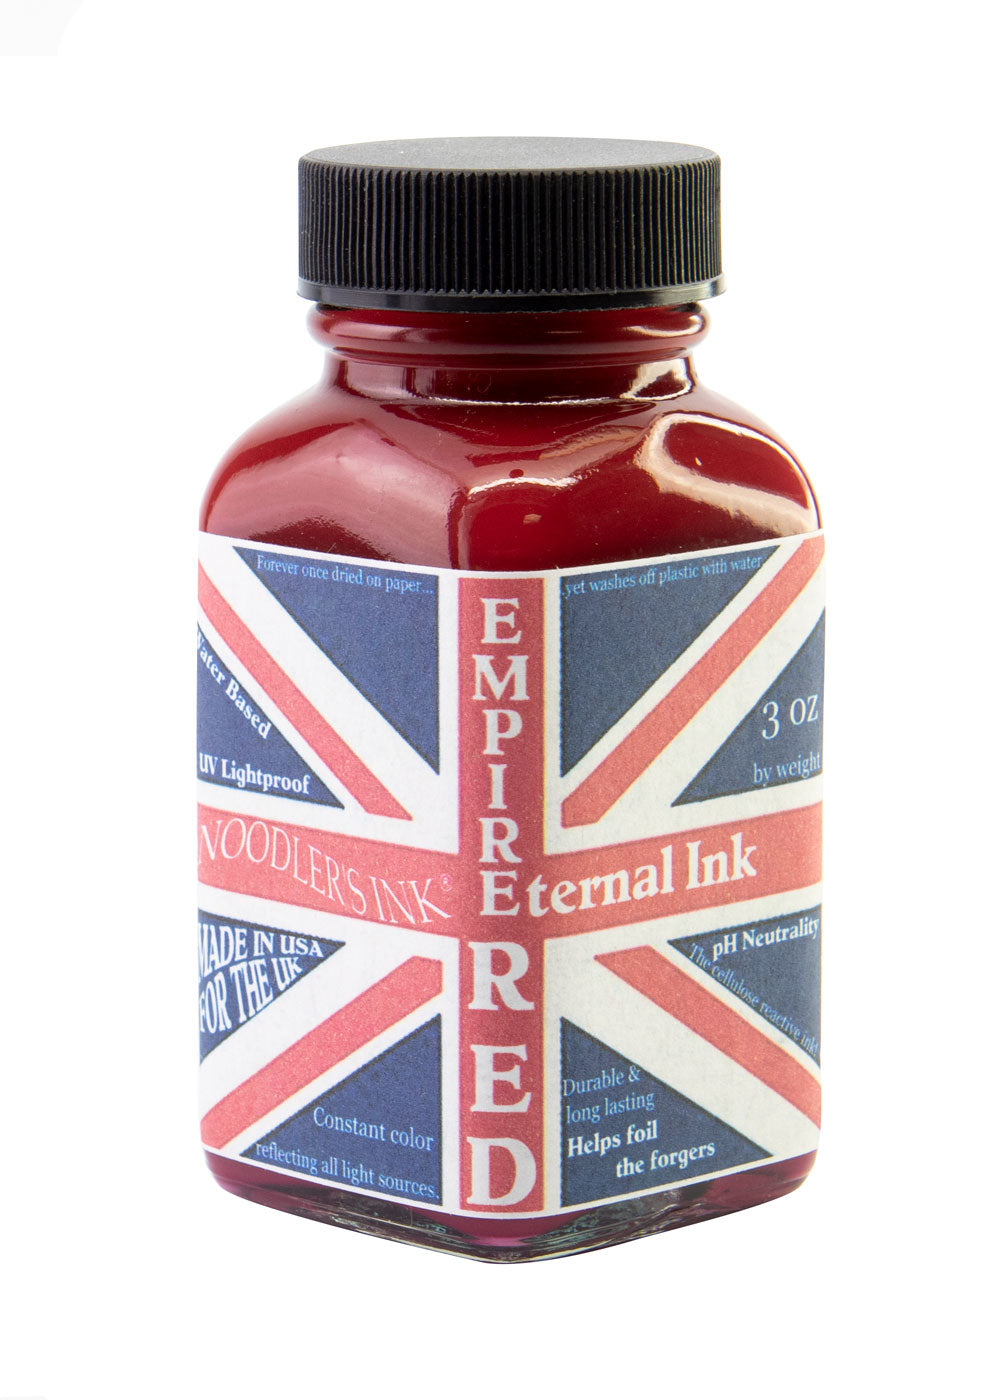 Noodler's Bottled Ink for Fountain Pens in Empire Red - 3oz - NEW in Box